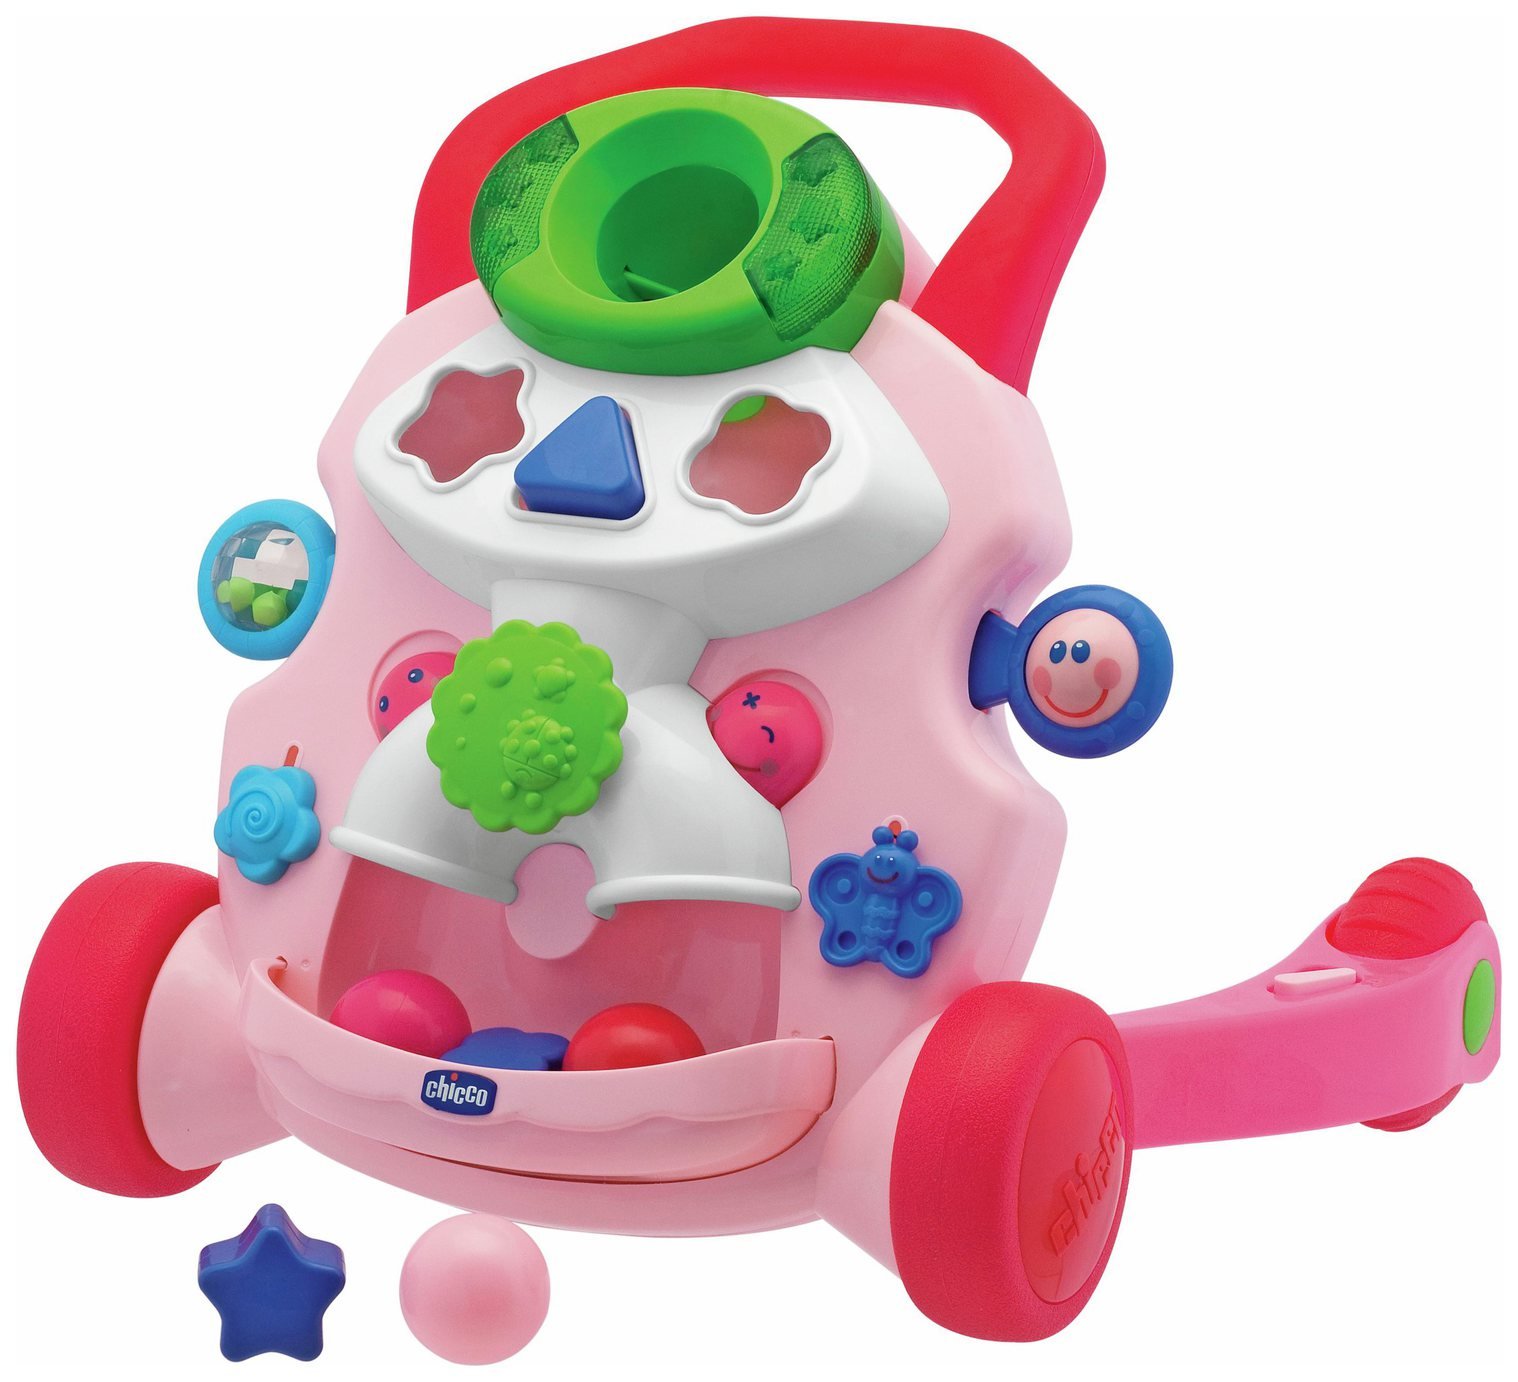 'Chicco Baby Steps Activity Walker - Pink